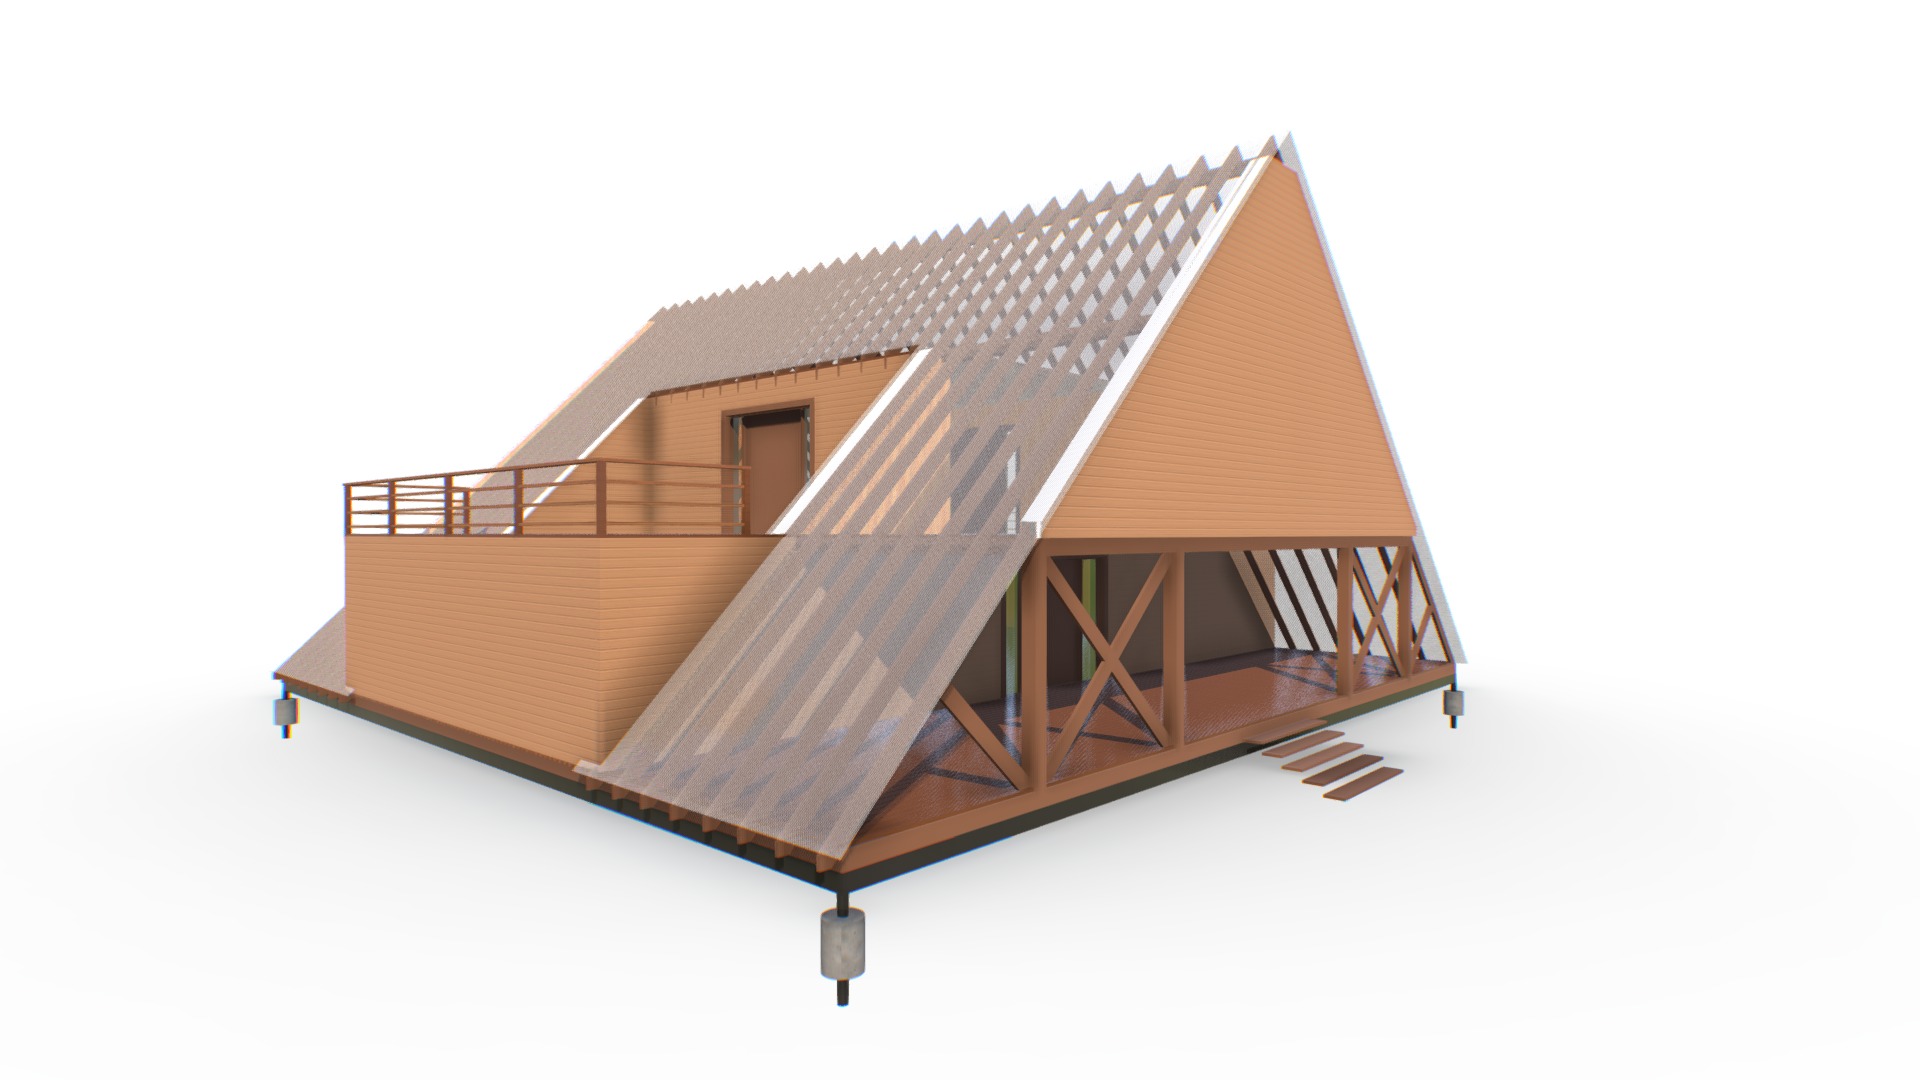 3D model Main Kras Sokol - This is a 3D model of the Main Kras Sokol. The 3D model is about a house made of wood.